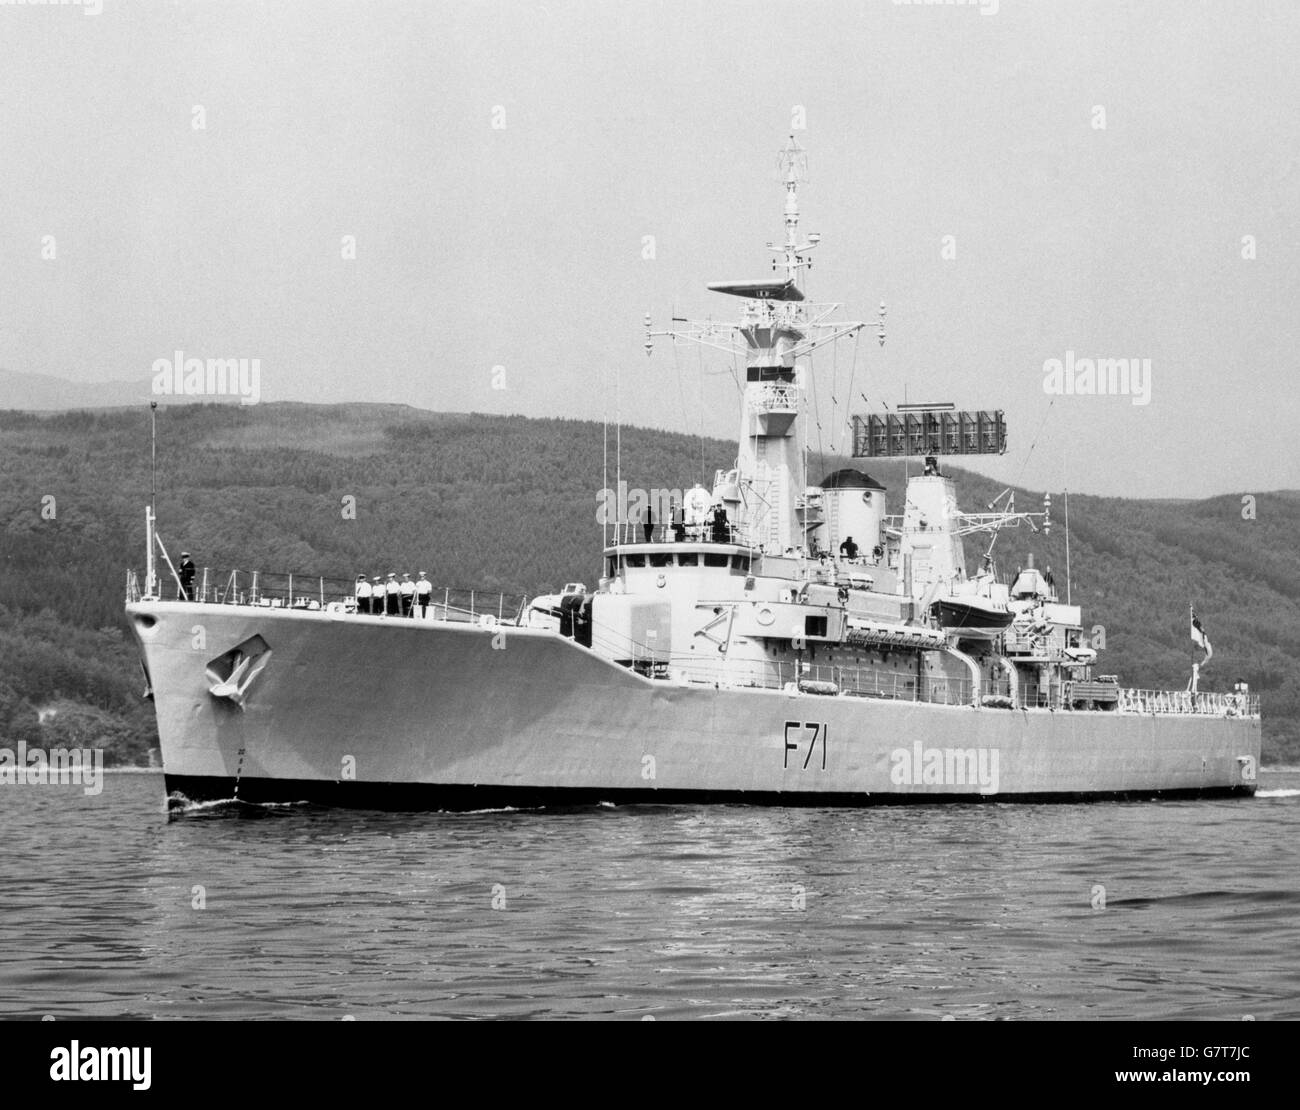 HMS Scylla (F71), Leander-class frigate of the Royal Navy. She was built at Devonport Royal Dockyard. Launched in 1968 and commissioned in 1970. Stock Photo